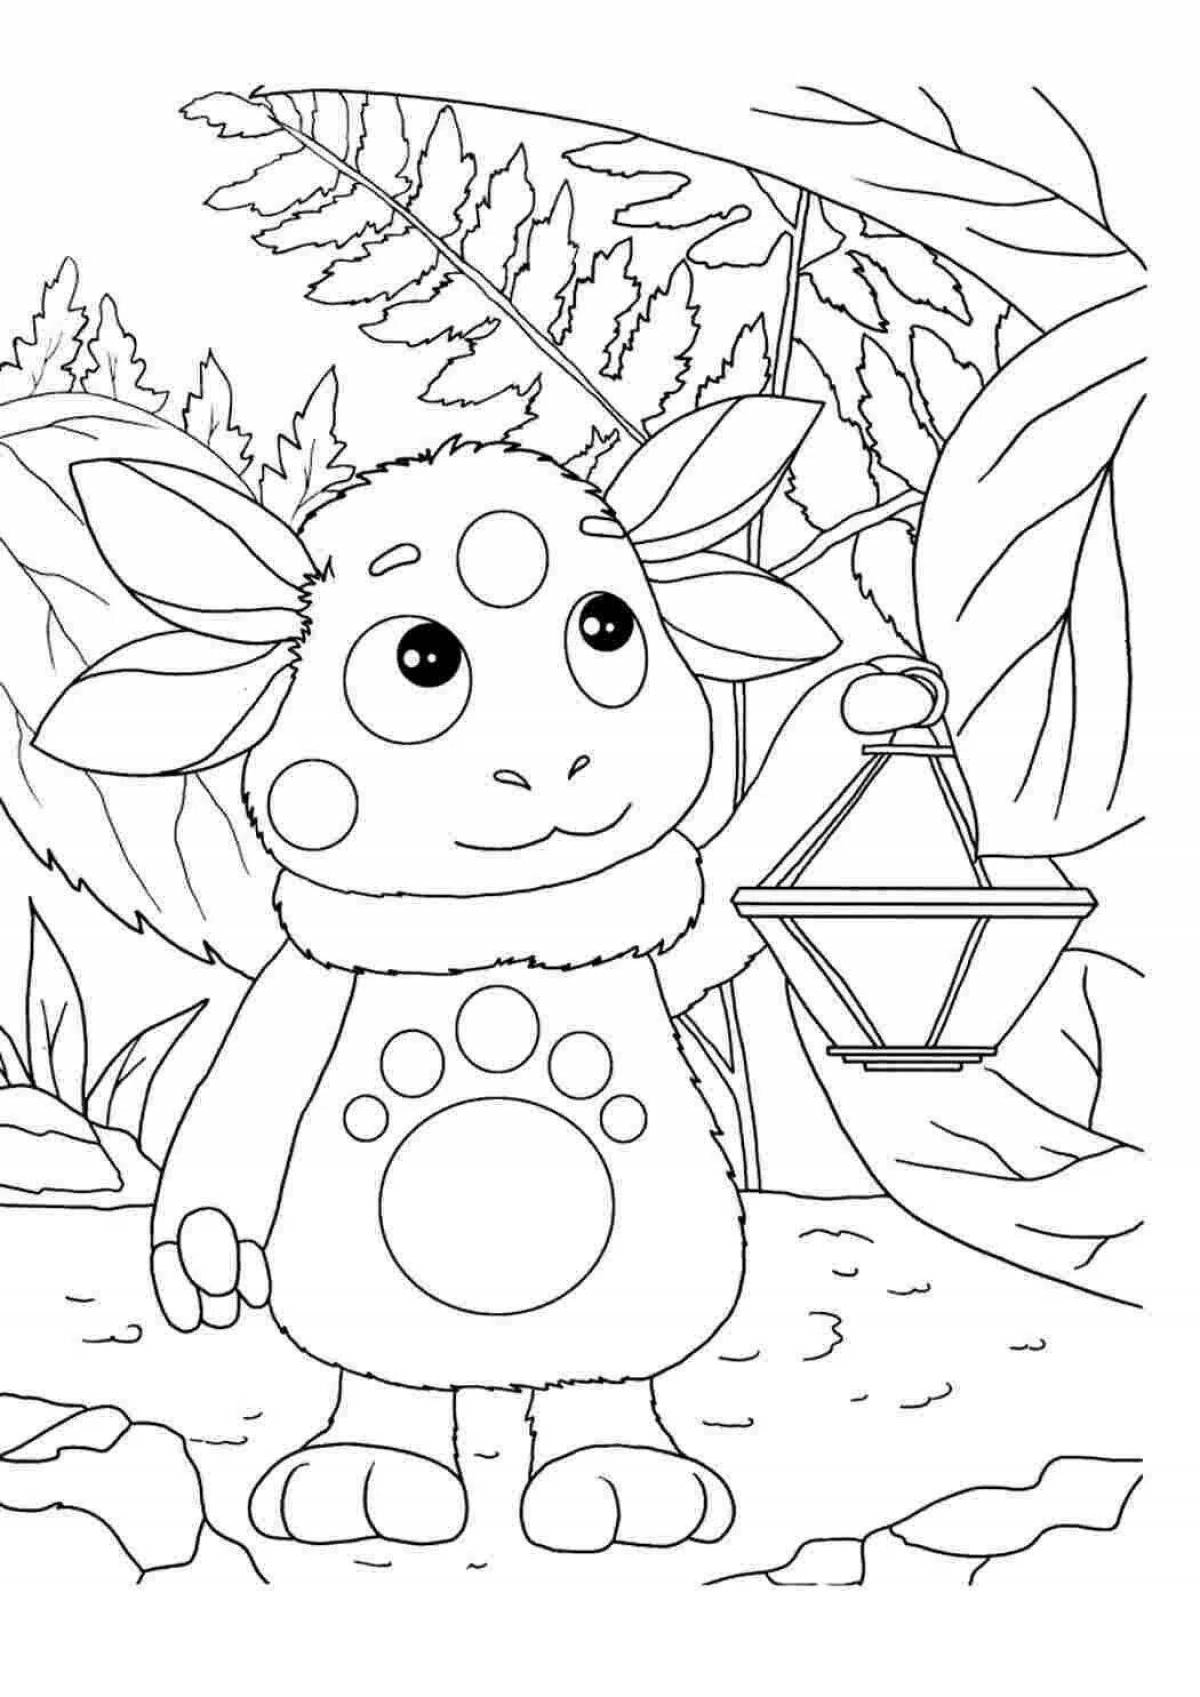 Adorable cartoon coloring book for kids 5 years old